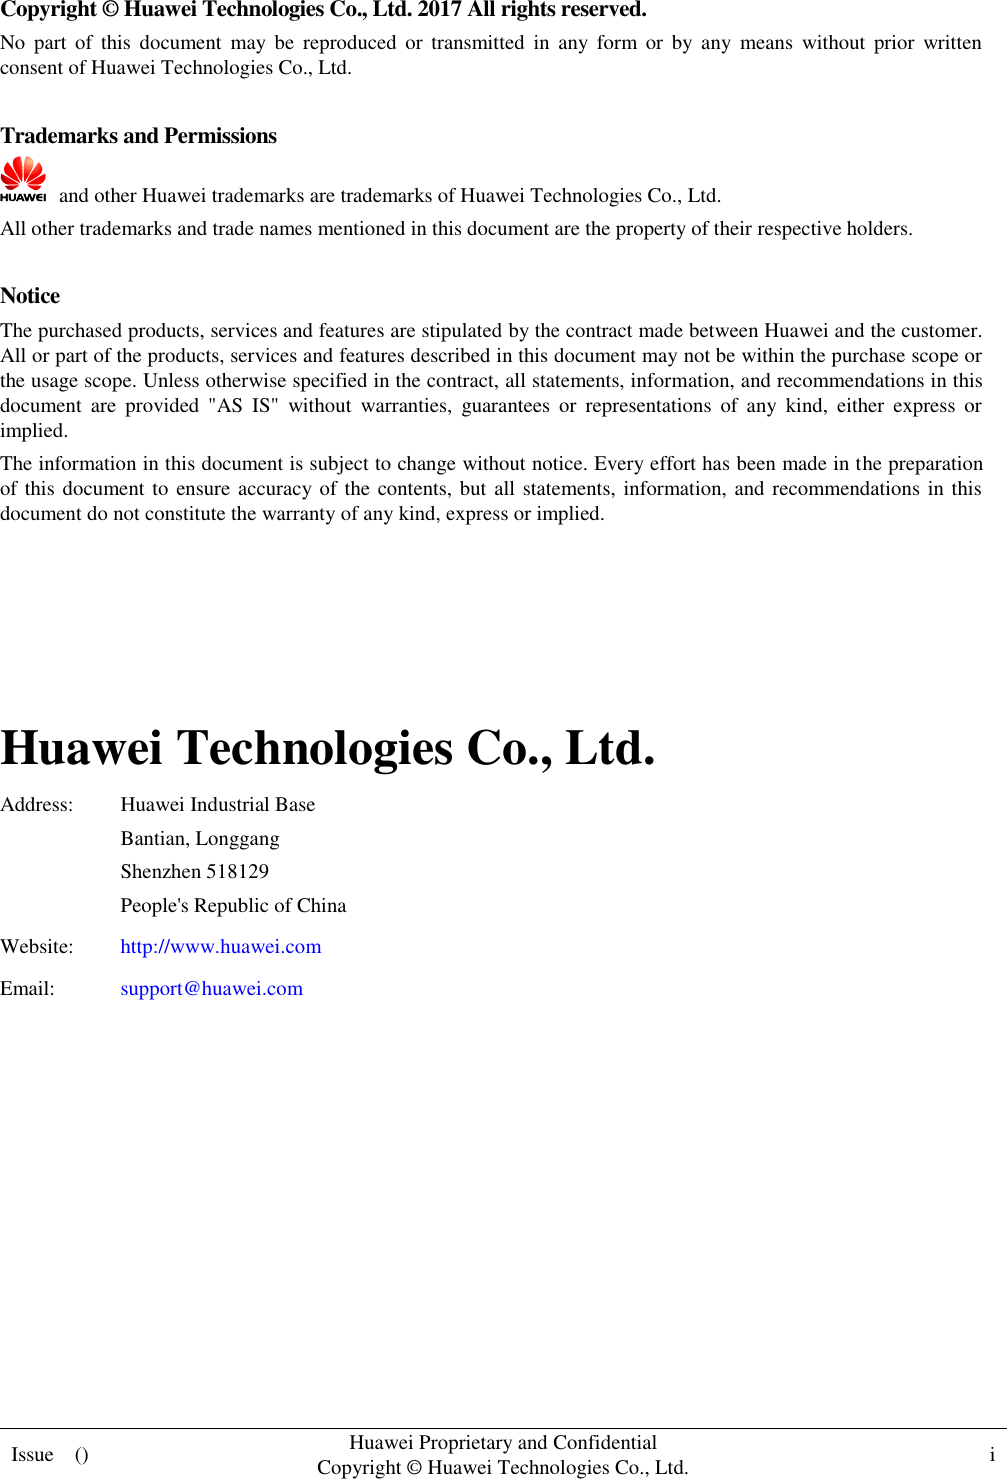  Issue    () Huawei Proprietary and Confidential                                     Copyright © Huawei Technologies Co., Ltd. i    Copyright © Huawei Technologies Co., Ltd. 2017 All rights reserved. No  part  of  this  document  may  be  reproduced  or  transmitted  in  any  form  or  by  any  means  without  prior  written consent of Huawei Technologies Co., Ltd.  Trademarks and Permissions   and other Huawei trademarks are trademarks of Huawei Technologies Co., Ltd. All other trademarks and trade names mentioned in this document are the property of their respective holders.  Notice The purchased products, services and features are stipulated by the contract made between Huawei and the customer. All or part of the products, services and features described in this document may not be within the purchase scope or the usage scope. Unless otherwise specified in the contract, all statements, information, and recommendations in this document  are  provided  &quot;AS  IS&quot;  without  warranties,  guarantees  or  representations  of  any  kind,  either  express  or implied. The information in this document is subject to change without notice. Every effort has been made in the preparation of this document to ensure accuracy of the contents, but all statements, information, and recommendations in this document do not constitute the warranty of any kind, express or implied.     Huawei Technologies Co., Ltd. Address: Huawei Industrial Base Bantian, Longgang Shenzhen 518129 People&apos;s Republic of China Website: http://www.huawei.com Email: support@huawei.com          